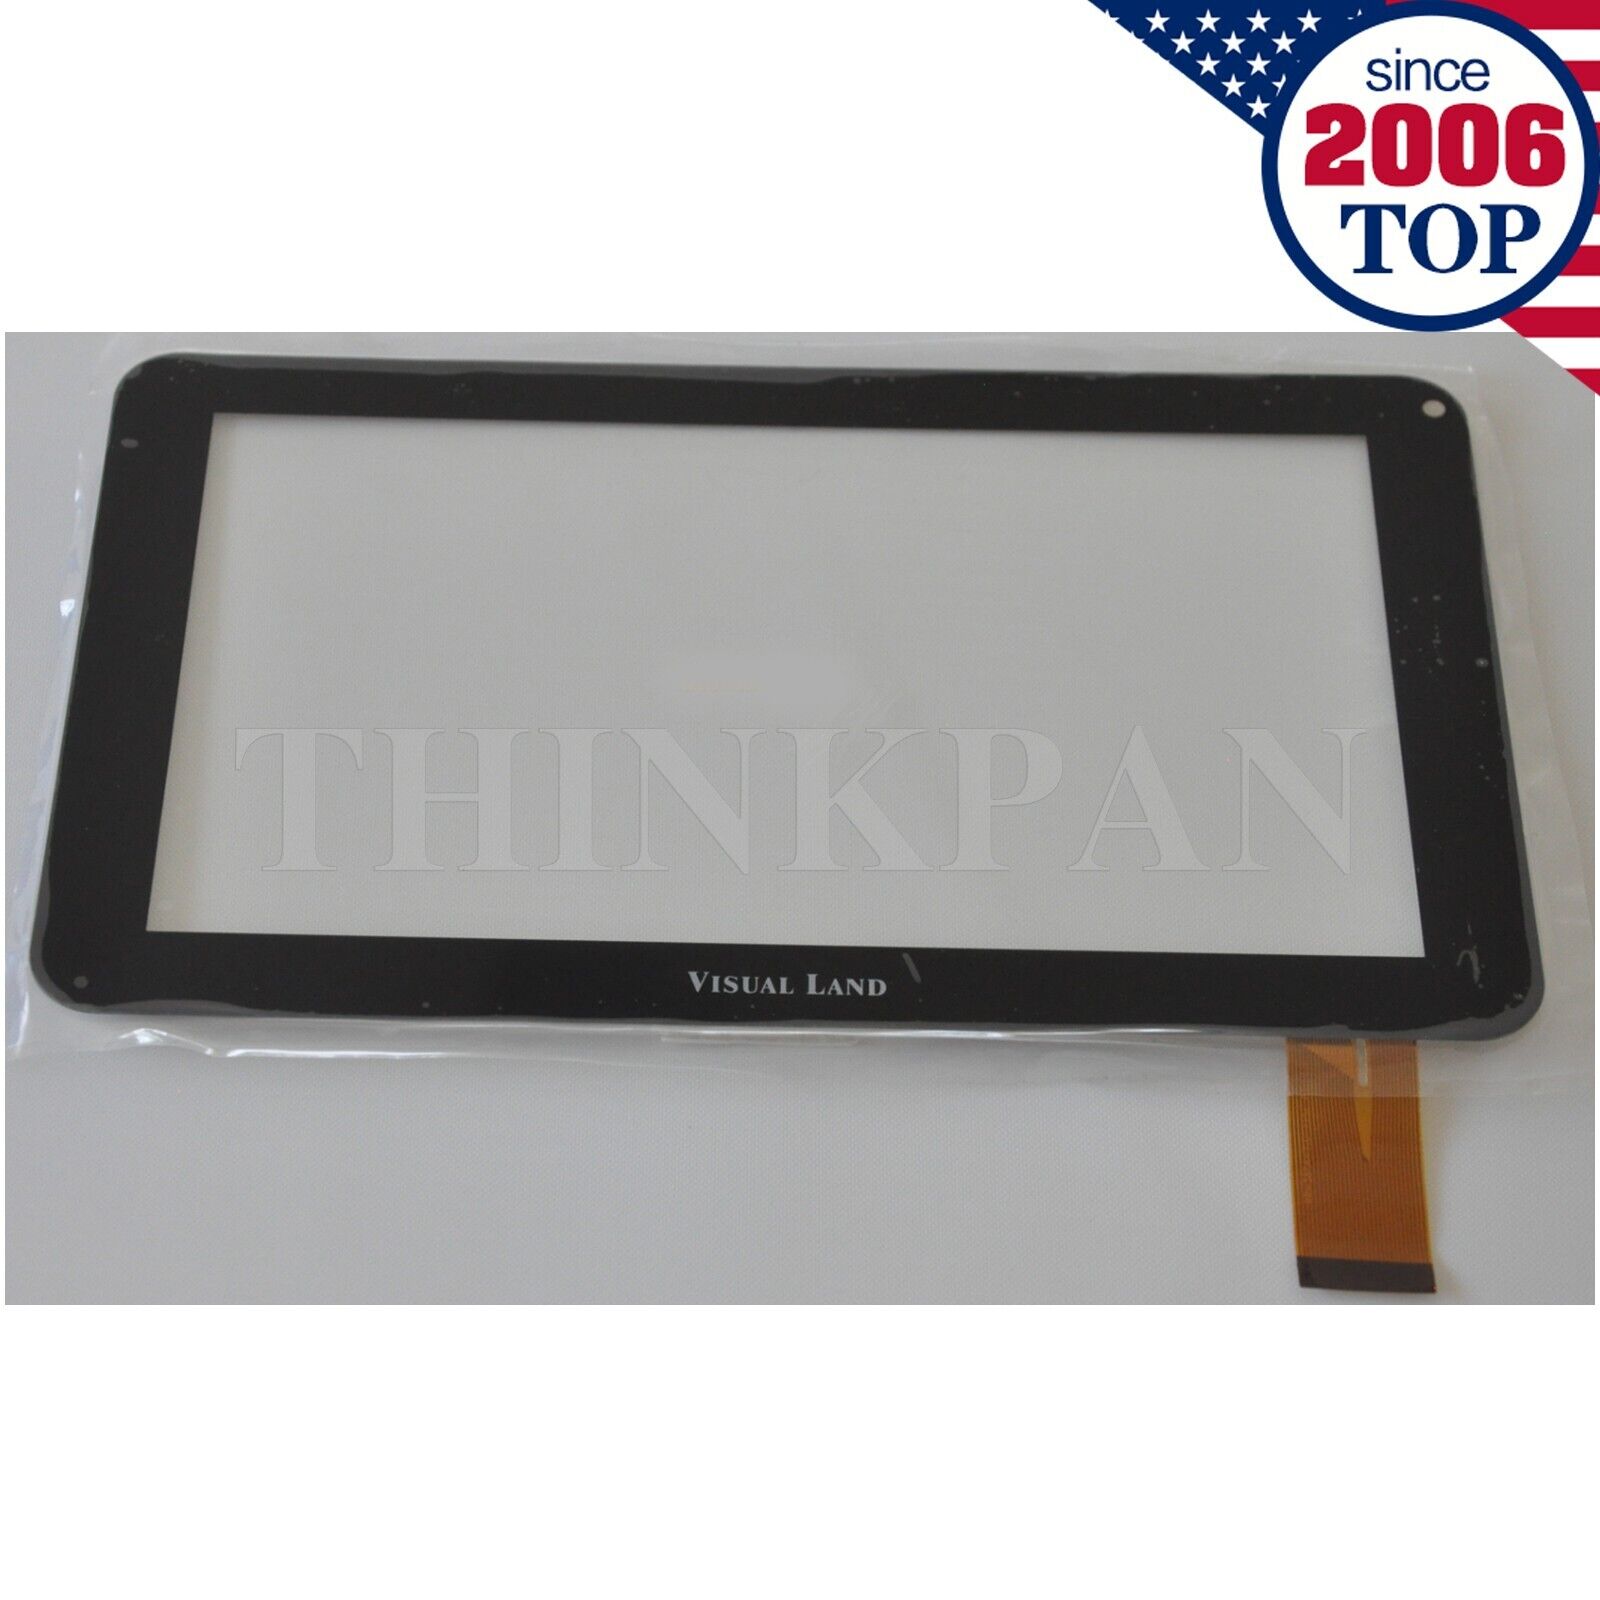 USA New Digitizer Touch Screen For Visual Land Prestige Elite 9QL 9 Inch Tablet